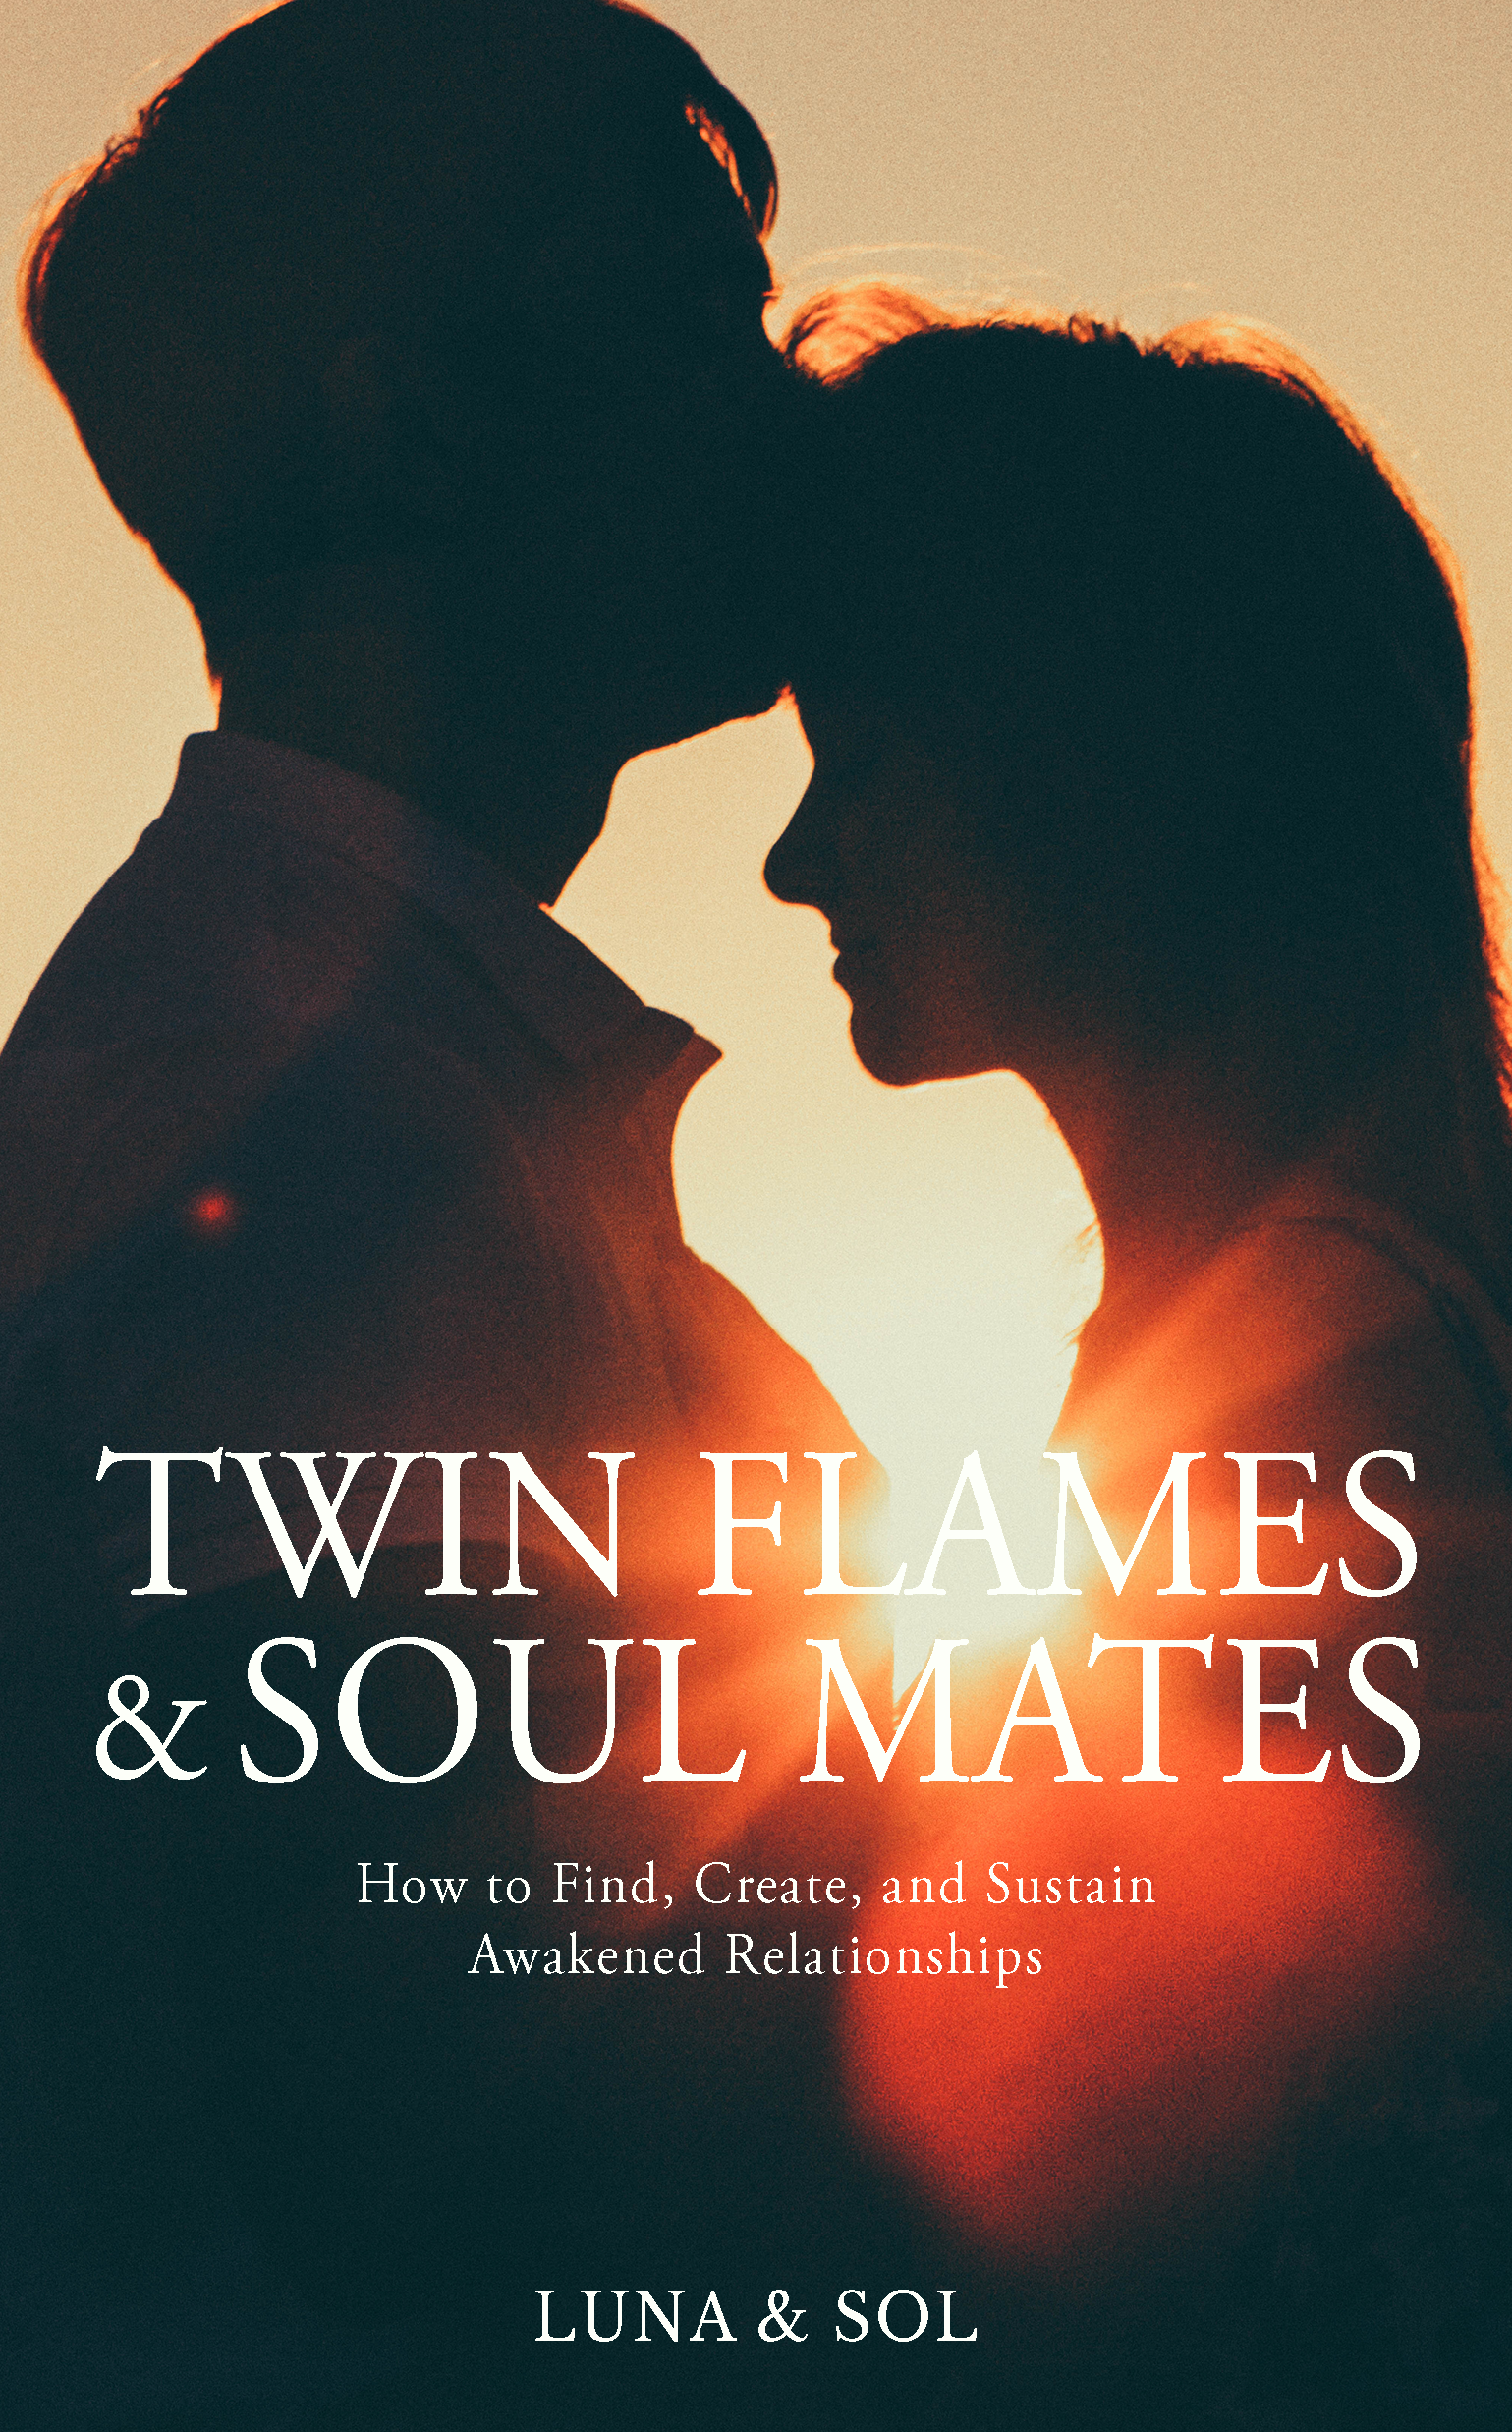 Difference Between a Soulmate and a Twin Flame